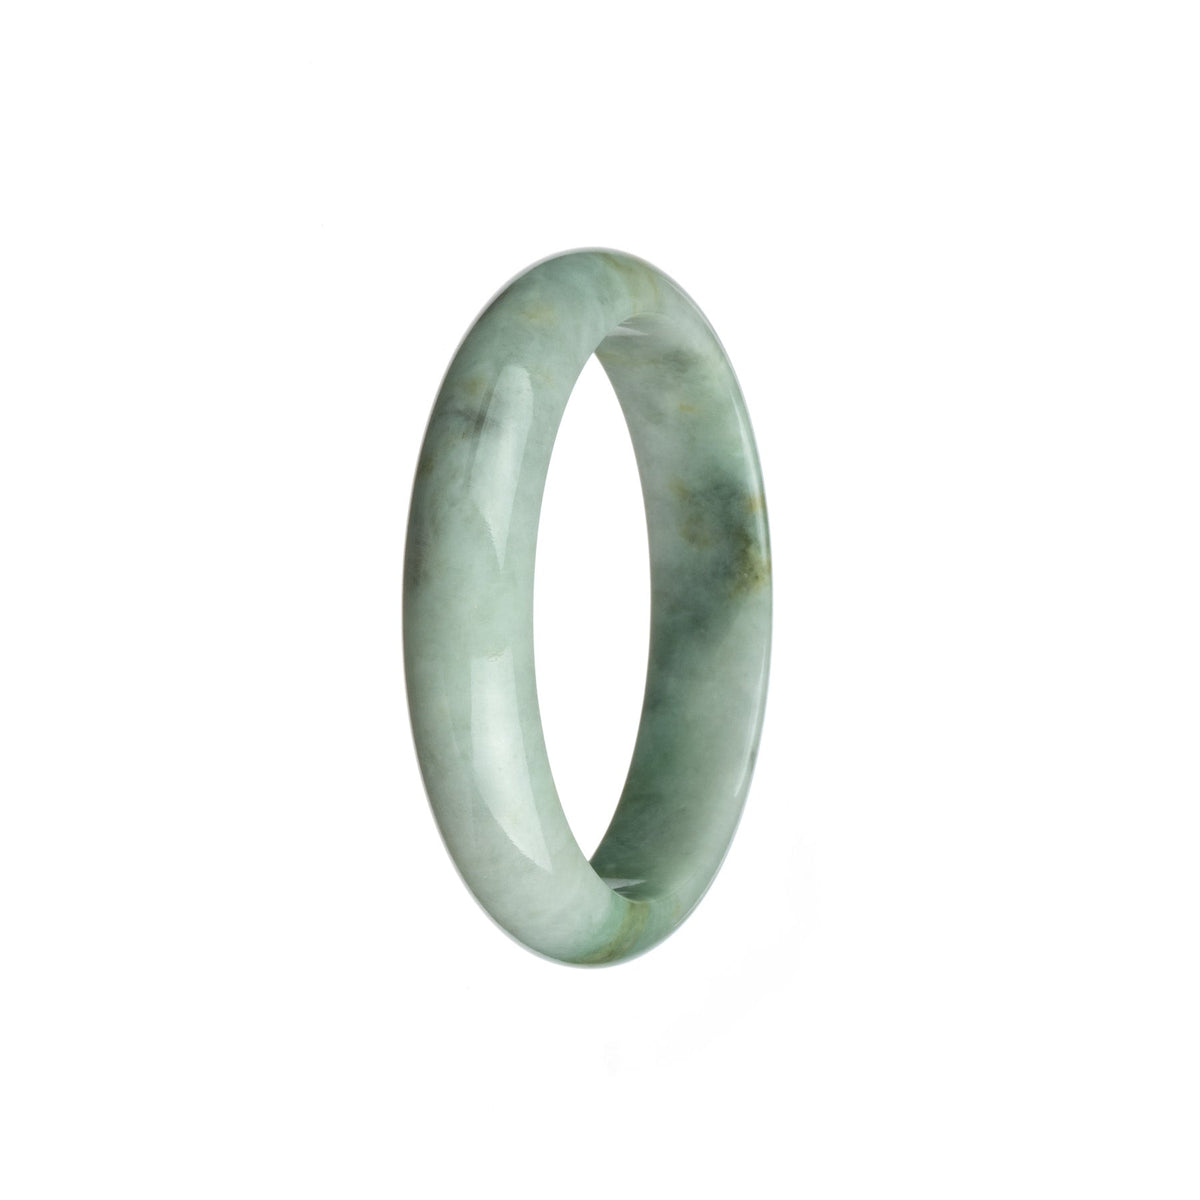 Genuine Untreated White with Green Traditional Jade Bracelet - 54mm Half Moon